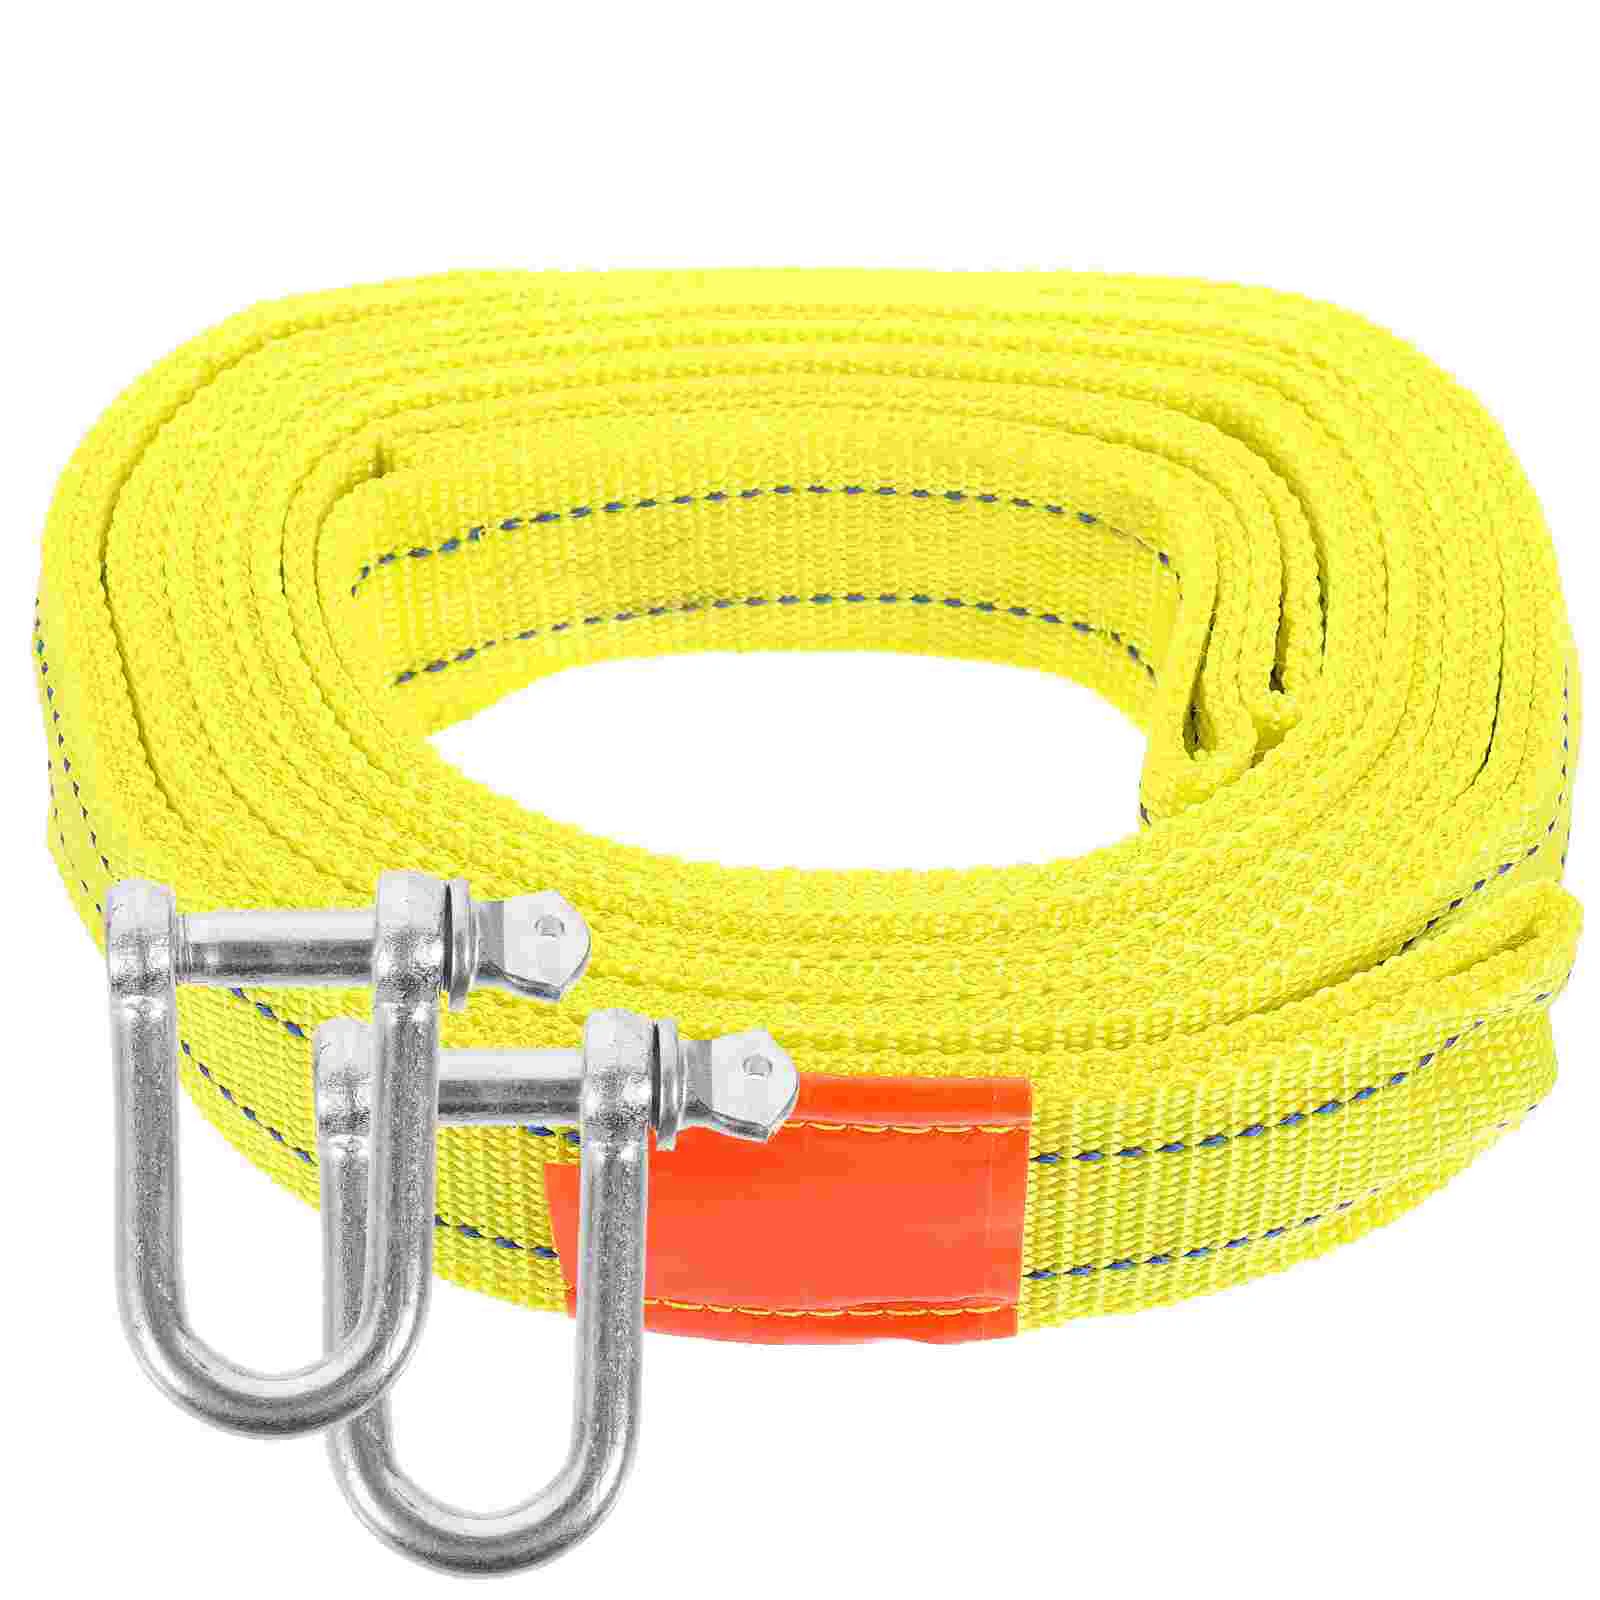 

5m 5 Ton Heavy Duty Tow Strap Car Trailer Towing Rope Strap Cable with Hooks Emergency Vehicle Tool Yellow